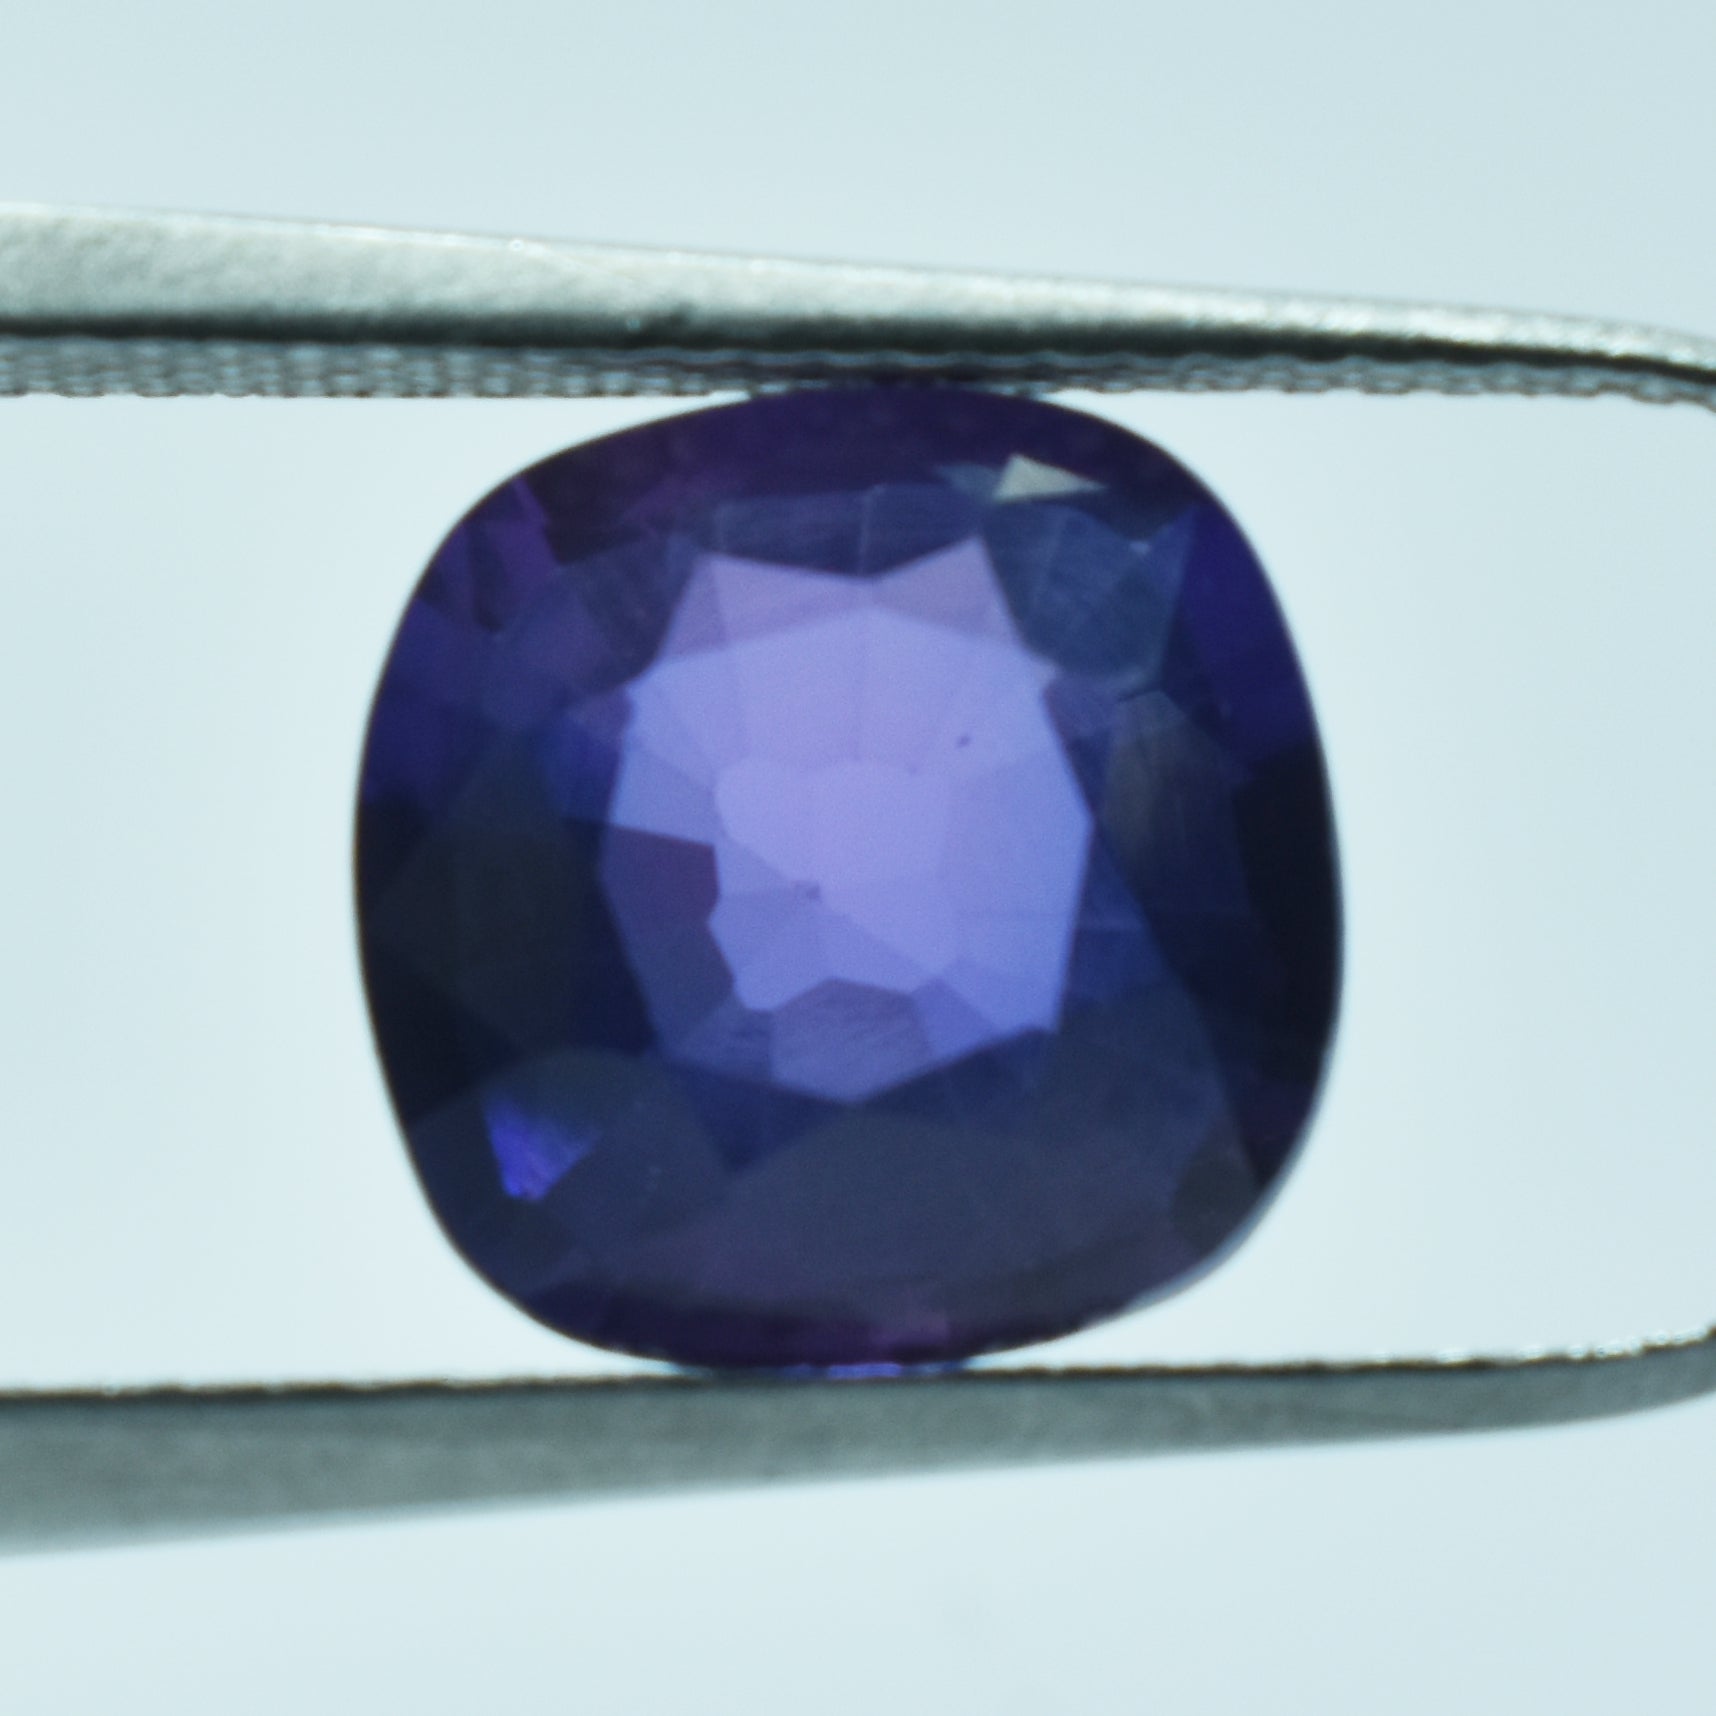 "Wonderful Gemstone " Square Cushion Cut Natural 8.99 Carat Certified Loose Gemstone | Free Shipped Free Gift | Summer's Outstanding Offer